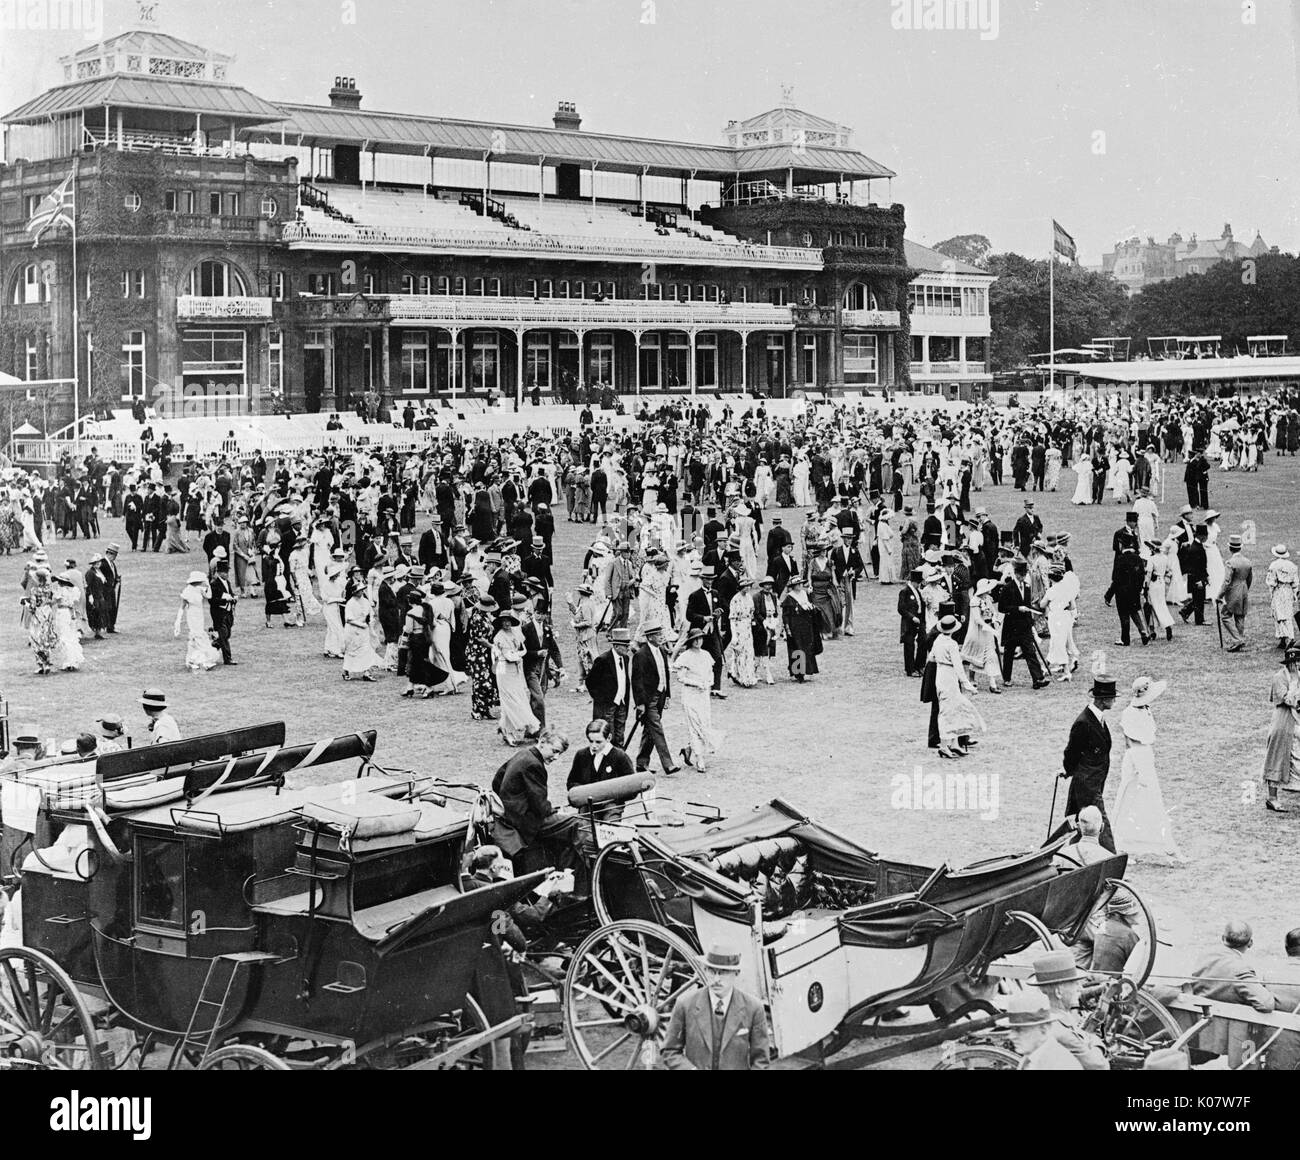 Scene during the annual Eton v Harrow cricket match at Lords Cricket Ground in NW London, 13 July 1934. Showing people strolling about during the lunch interval, with traditional carriages in the foreground. The match itself was a draw.     Date: 1934 Stock Photo